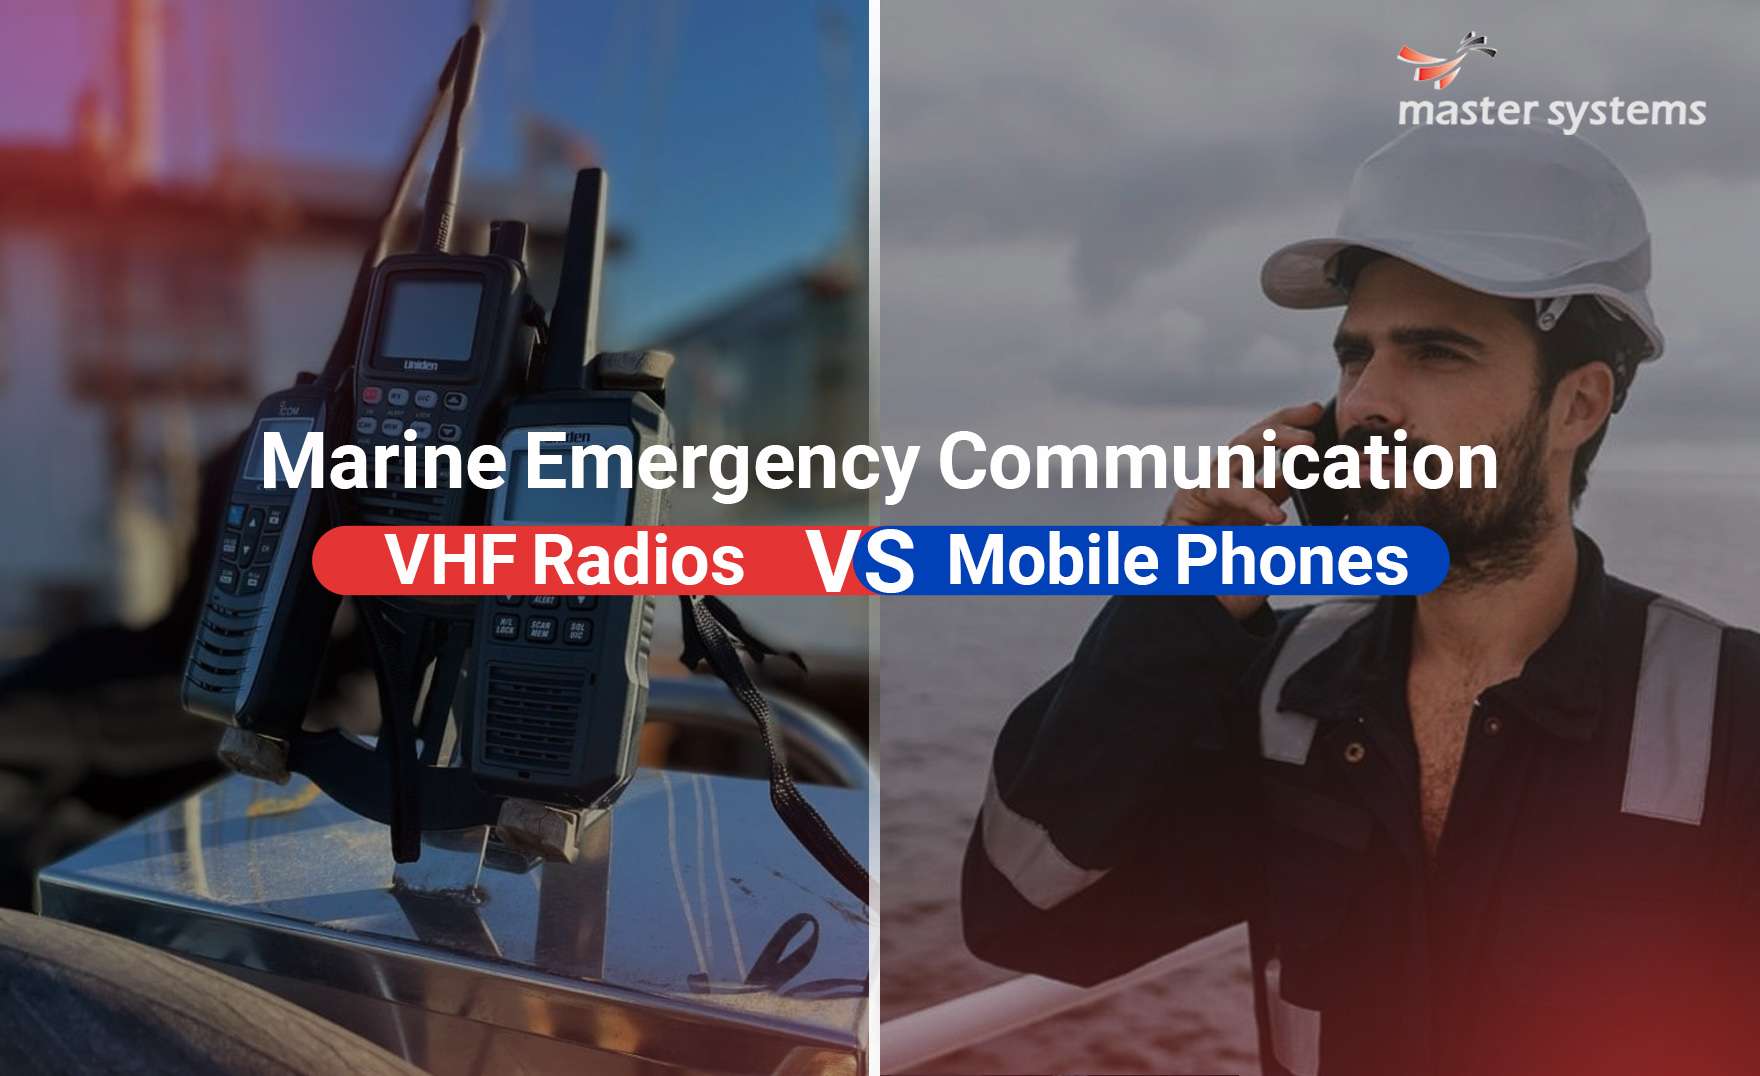 VHF RADIO OR MOBILE PHONE FOR EMERGENCY COMMUNICATION AT SEA: WHICH IS THE BETTER OPTION?